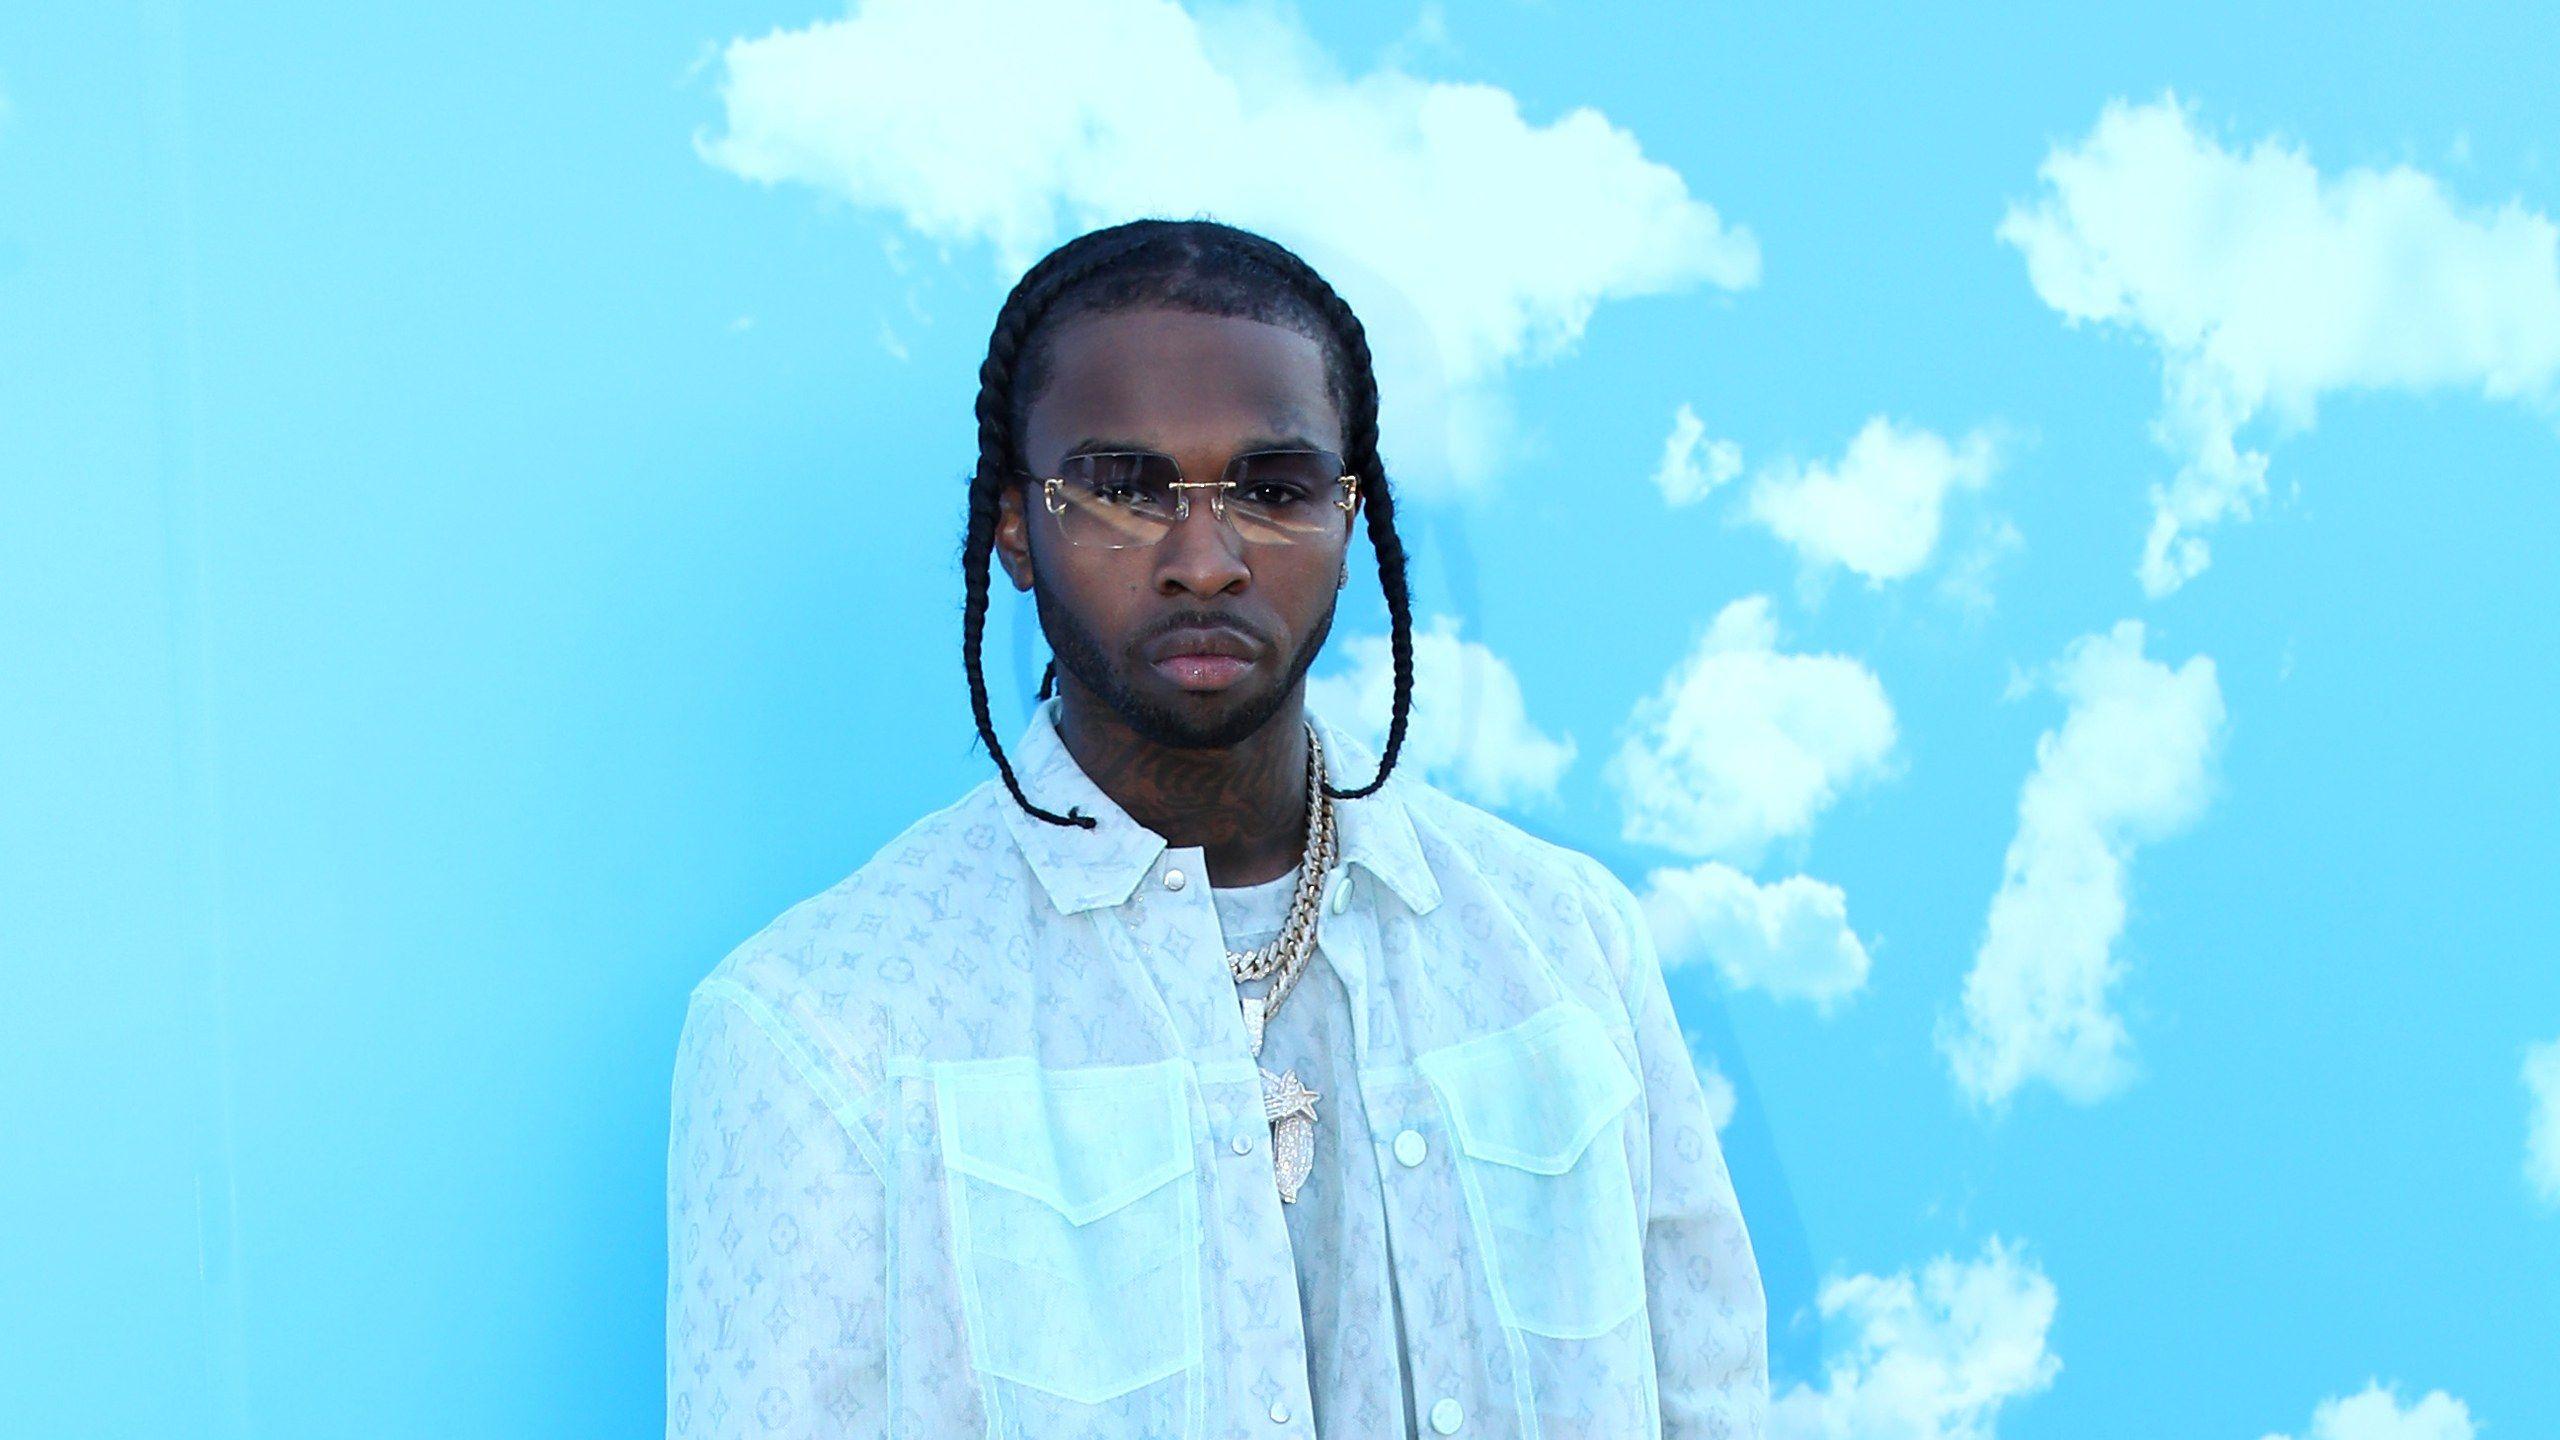 A man in glasses standing against blue clouds - Blue, Pop Smoke